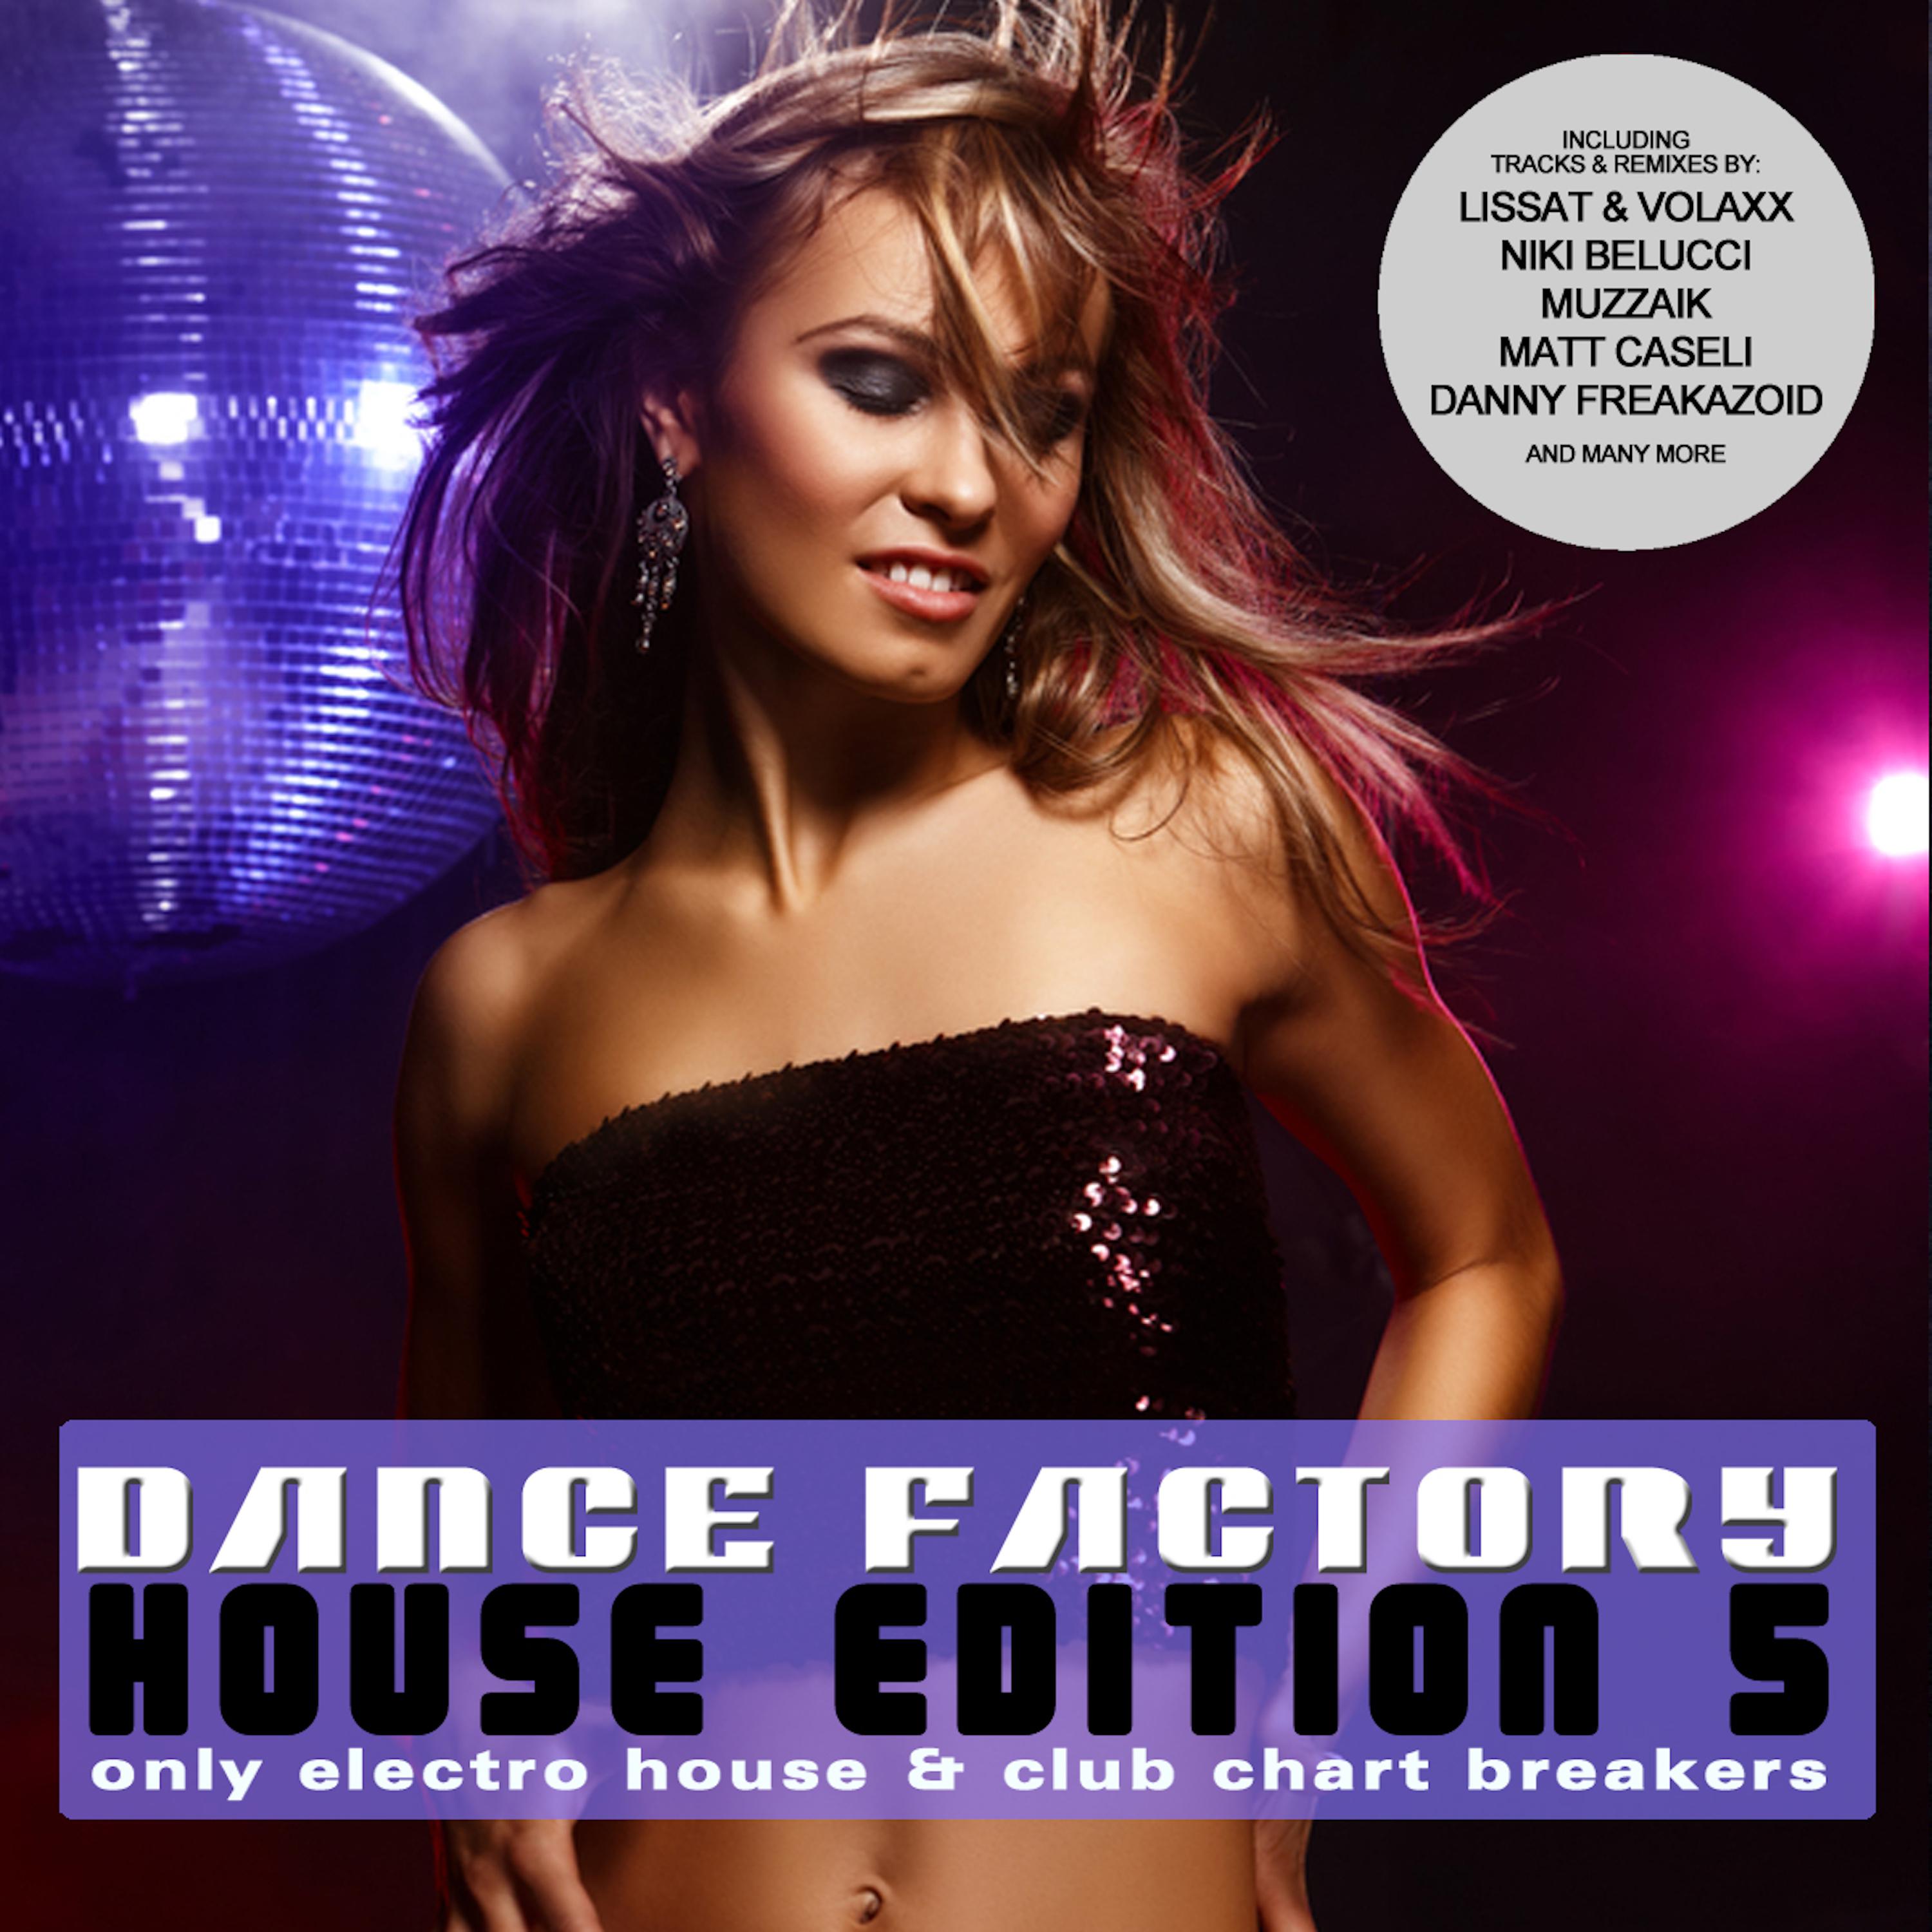 Dance Factory 5 - House Edition - Only Electro House & Club Chart Breakers